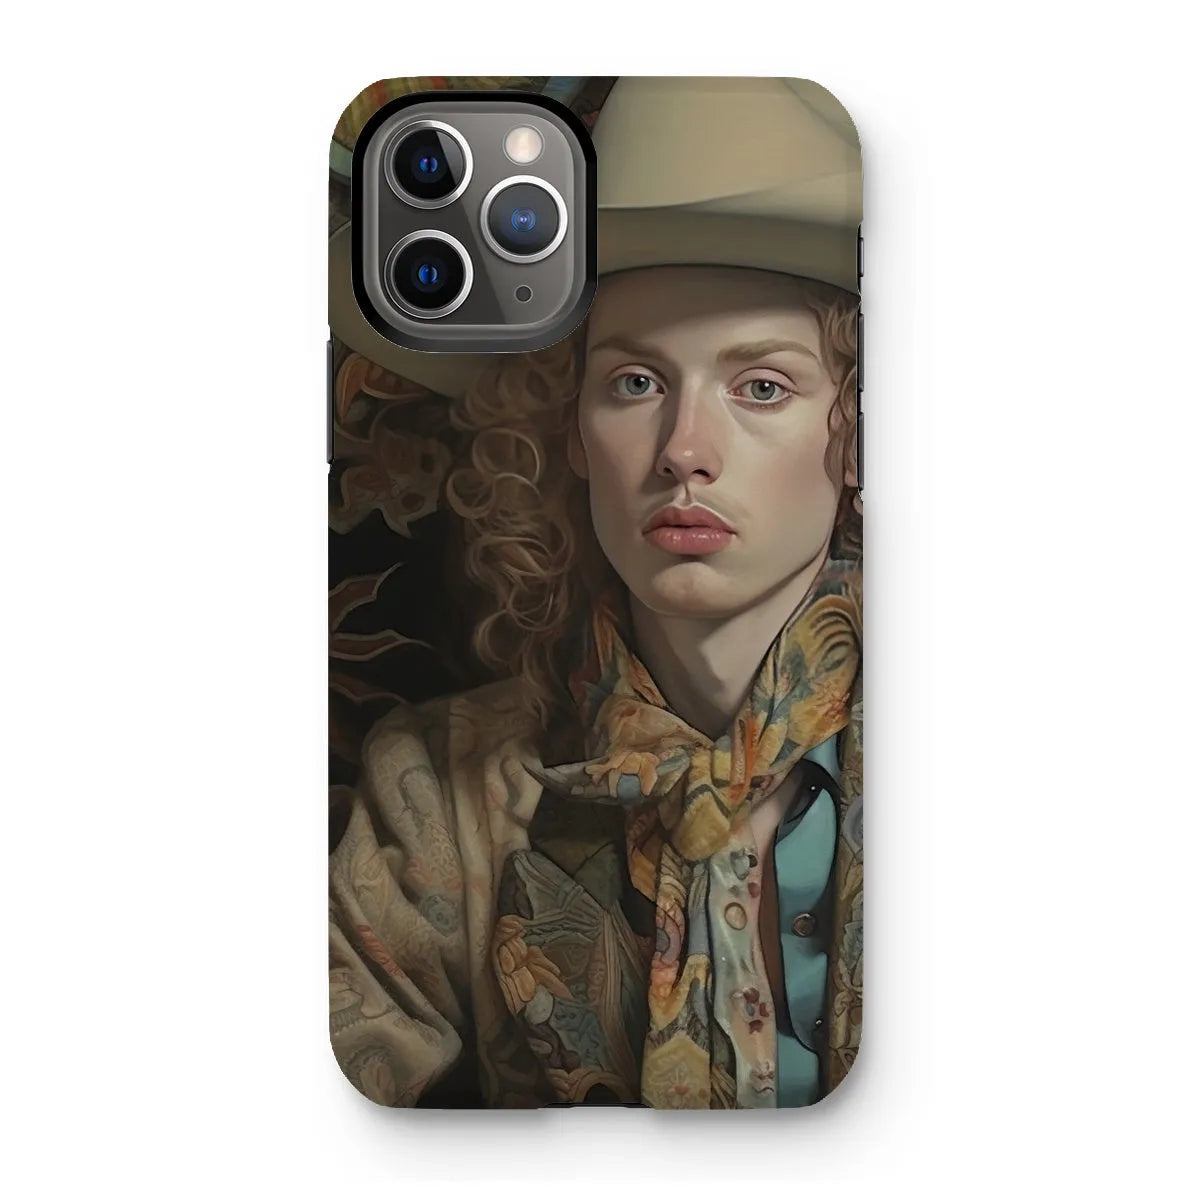 Ollie The Transgender Cowboy - F2m Dandy Outlaw Phone Case - Iphone 11 Pro / Matte - Mobile Phone Cases - Aesthetic Art